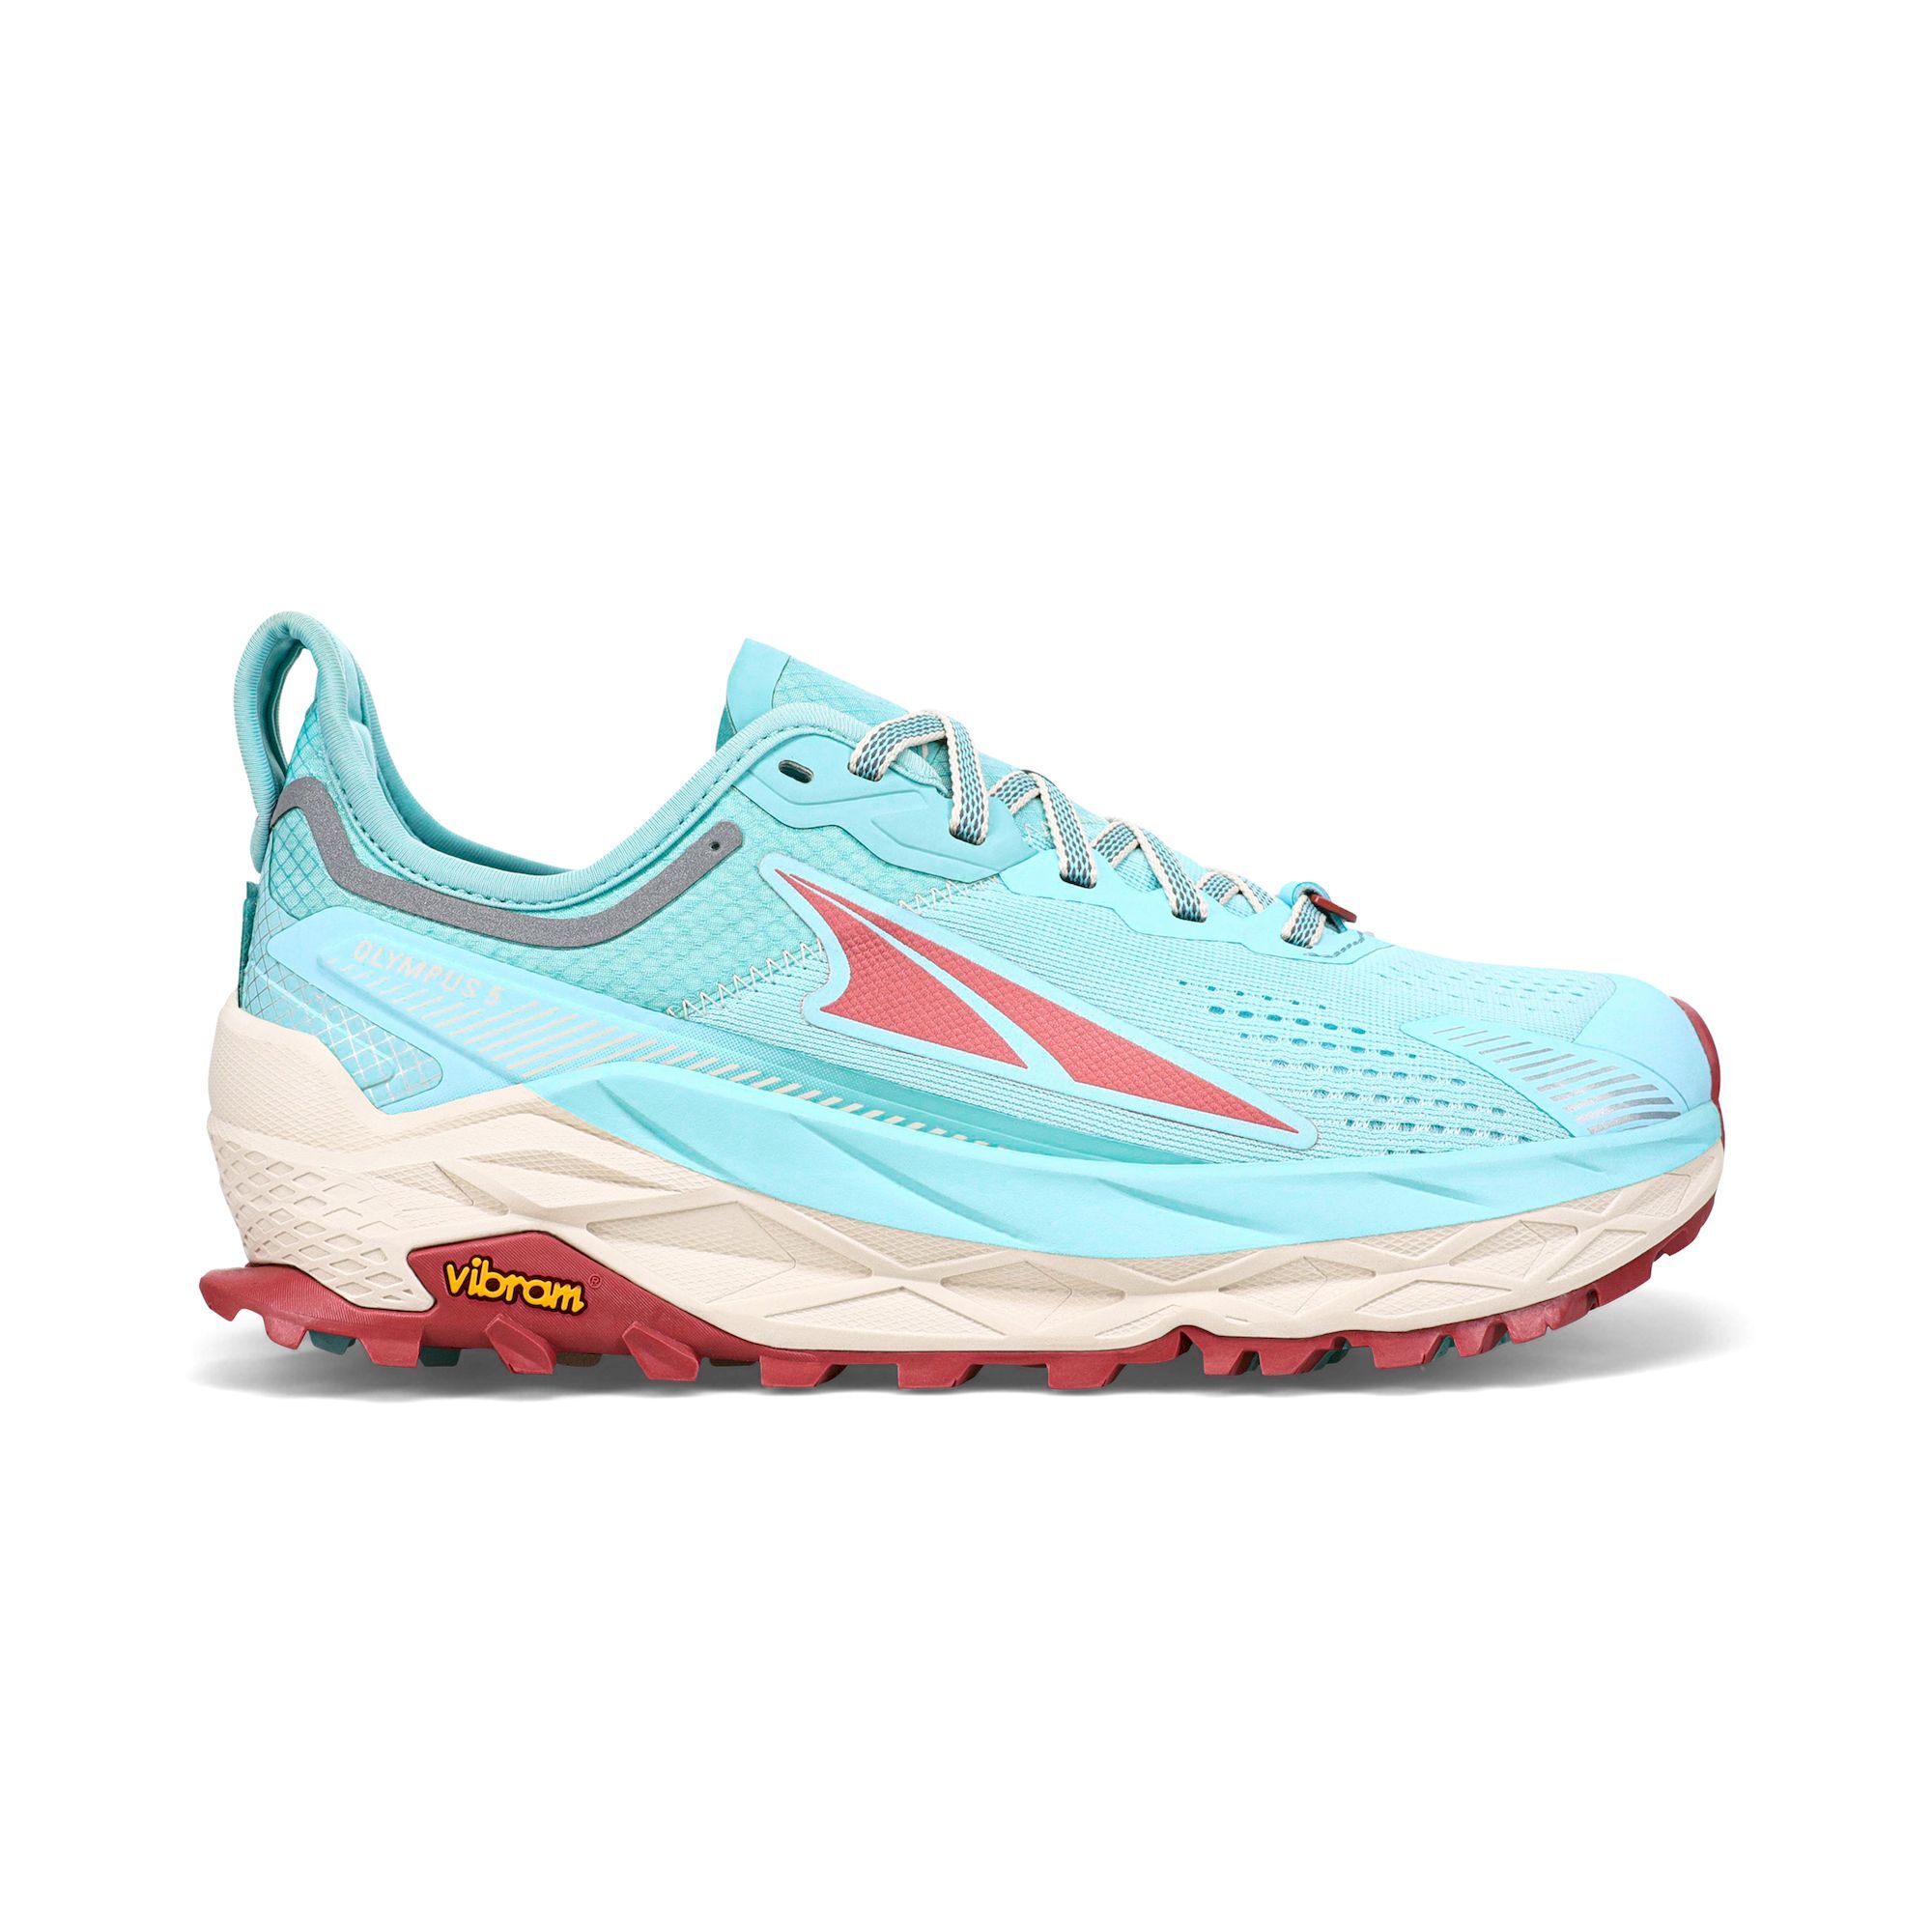 Altra Olympus 5 - Trail running shoes - Women's